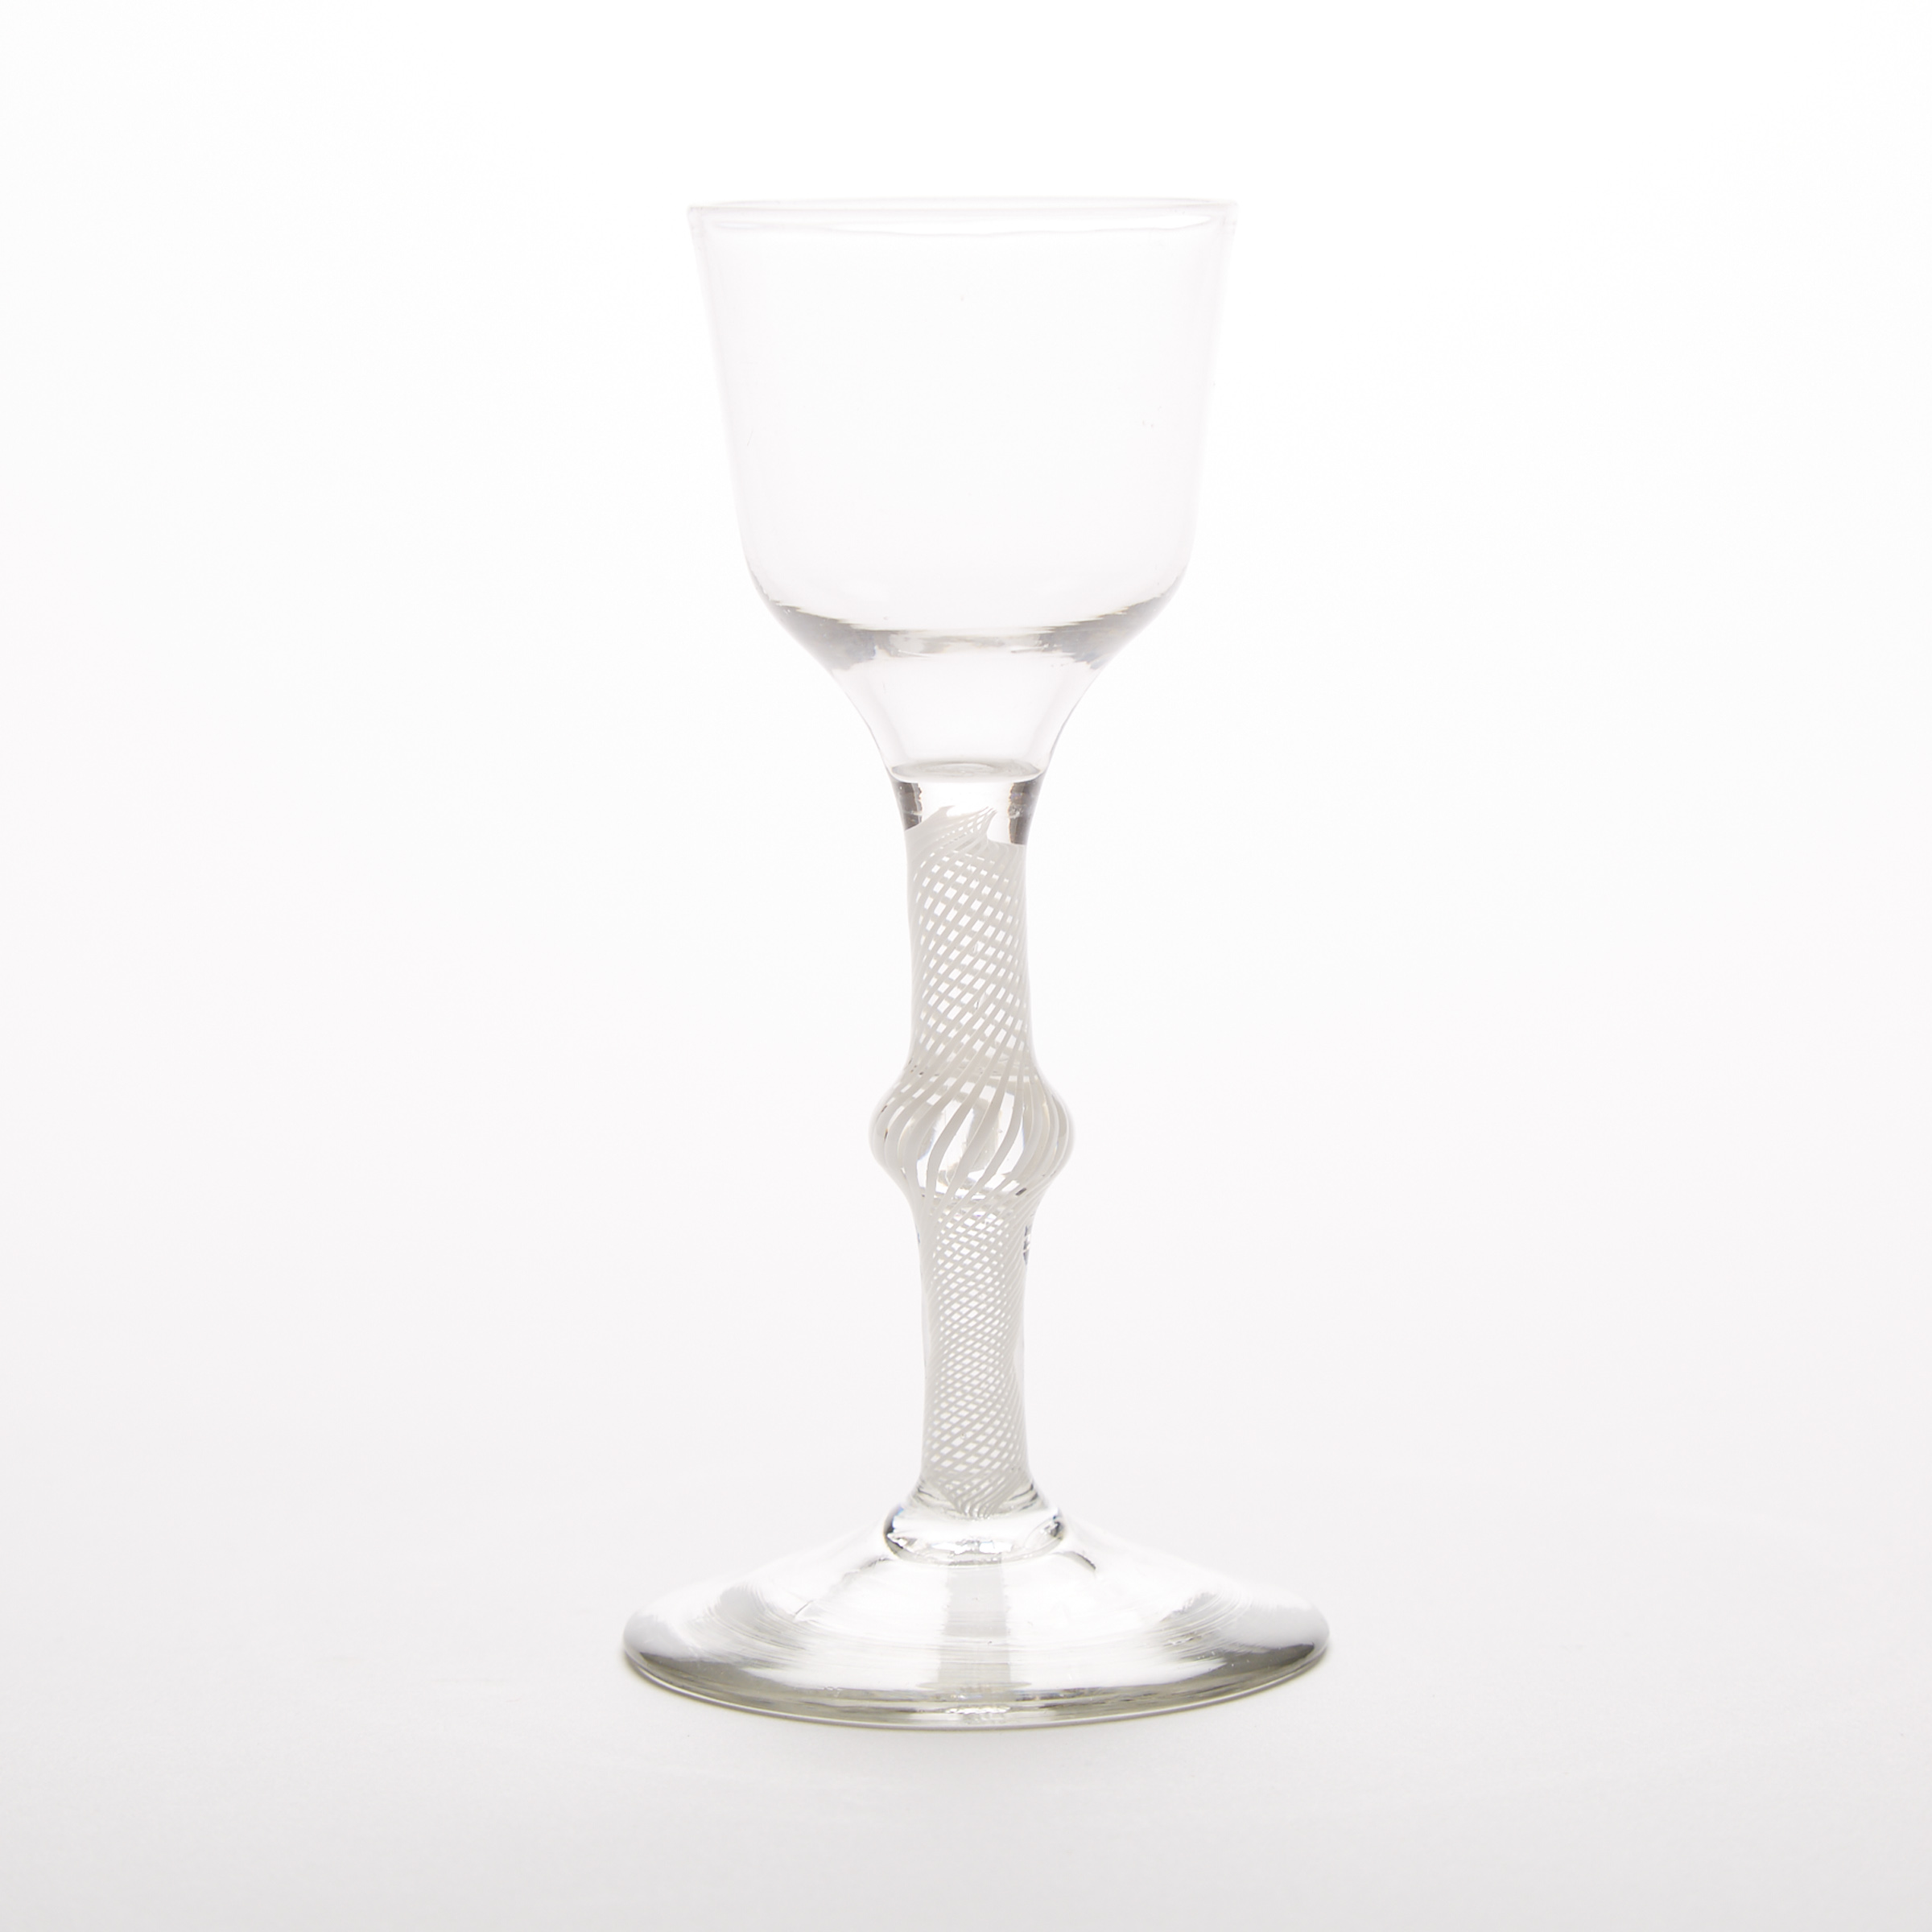 English Knopped Opaque Twist Stemmed Wine Glass, c.1760